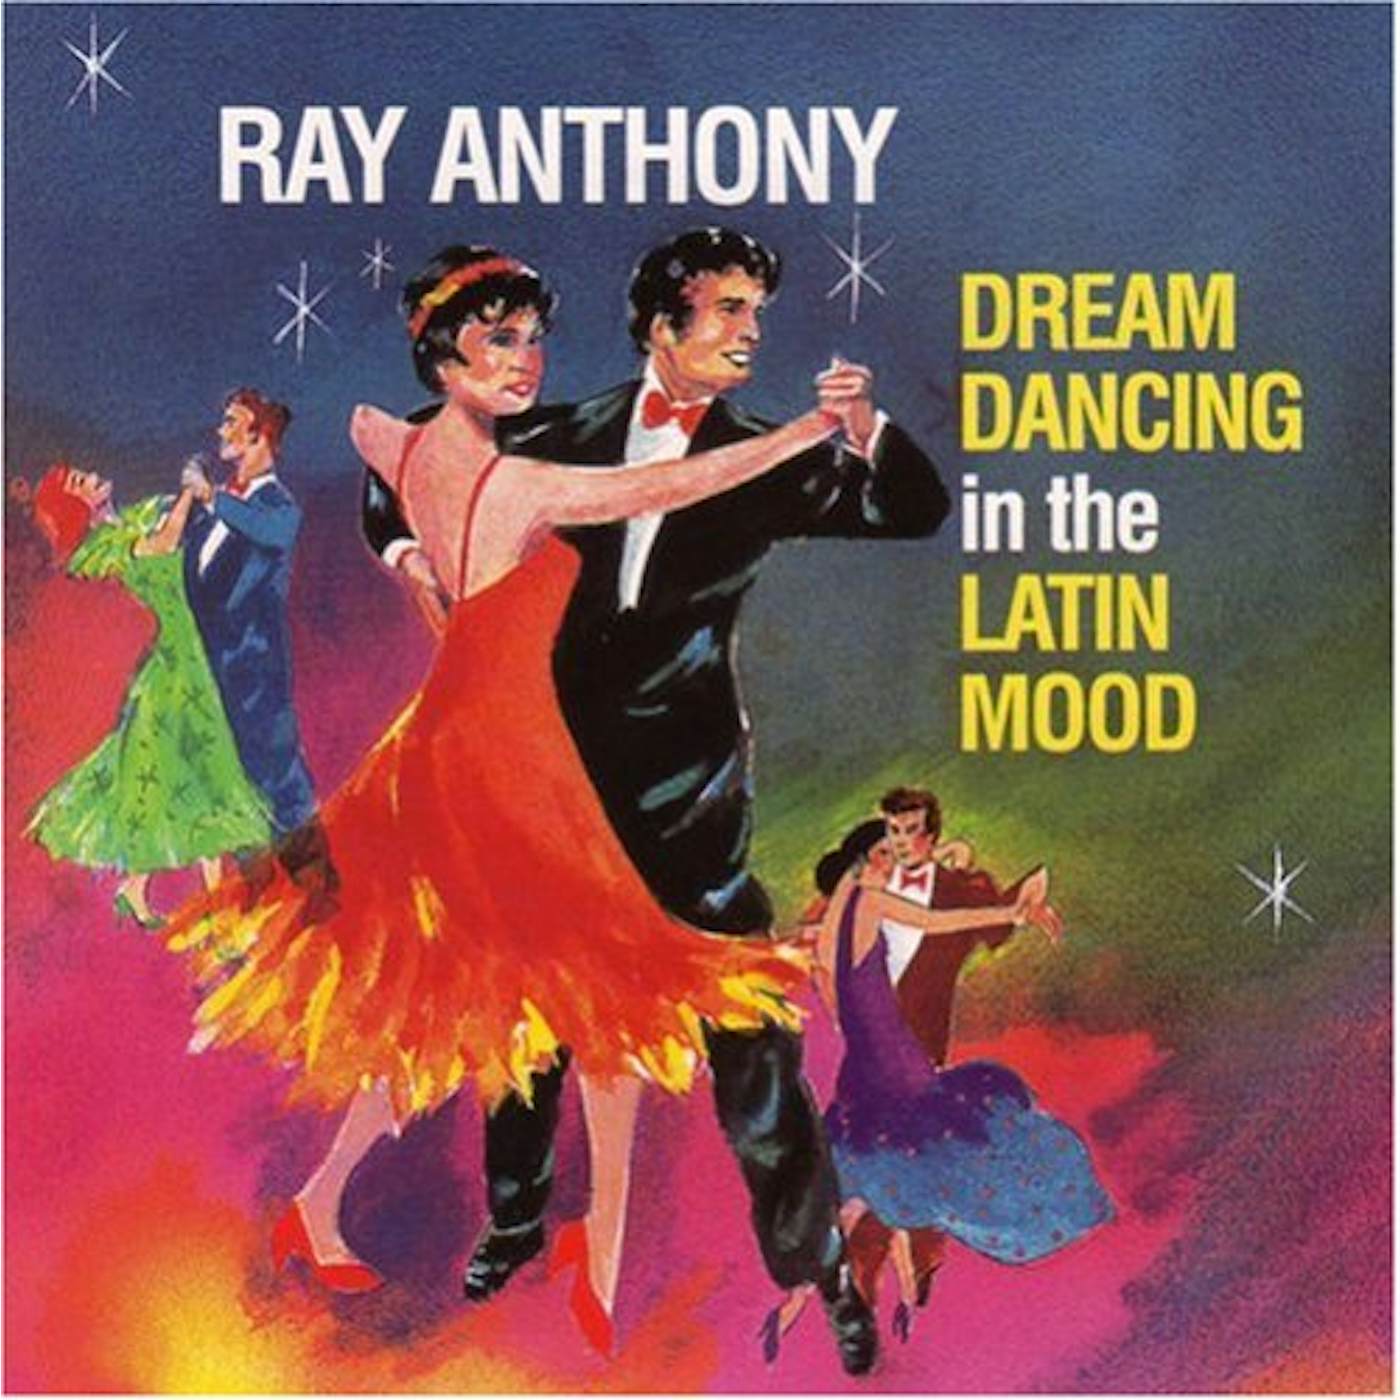 Ray Anthony DREAM DANCING IN THE LATIN MOOD CD